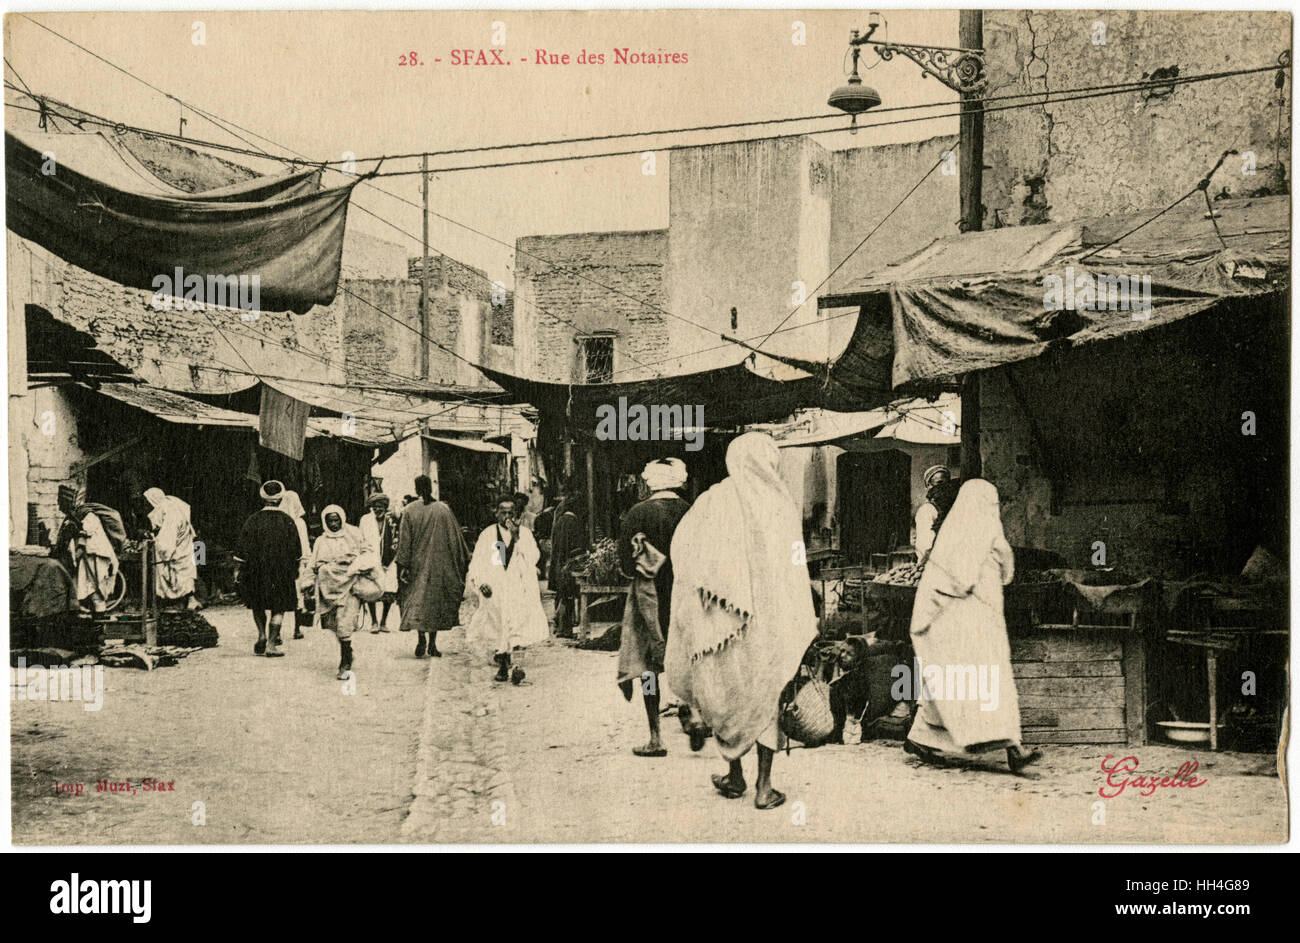 Sfax, Tunisia - Rue des Notaires (Street of Notaries). Stock Photo